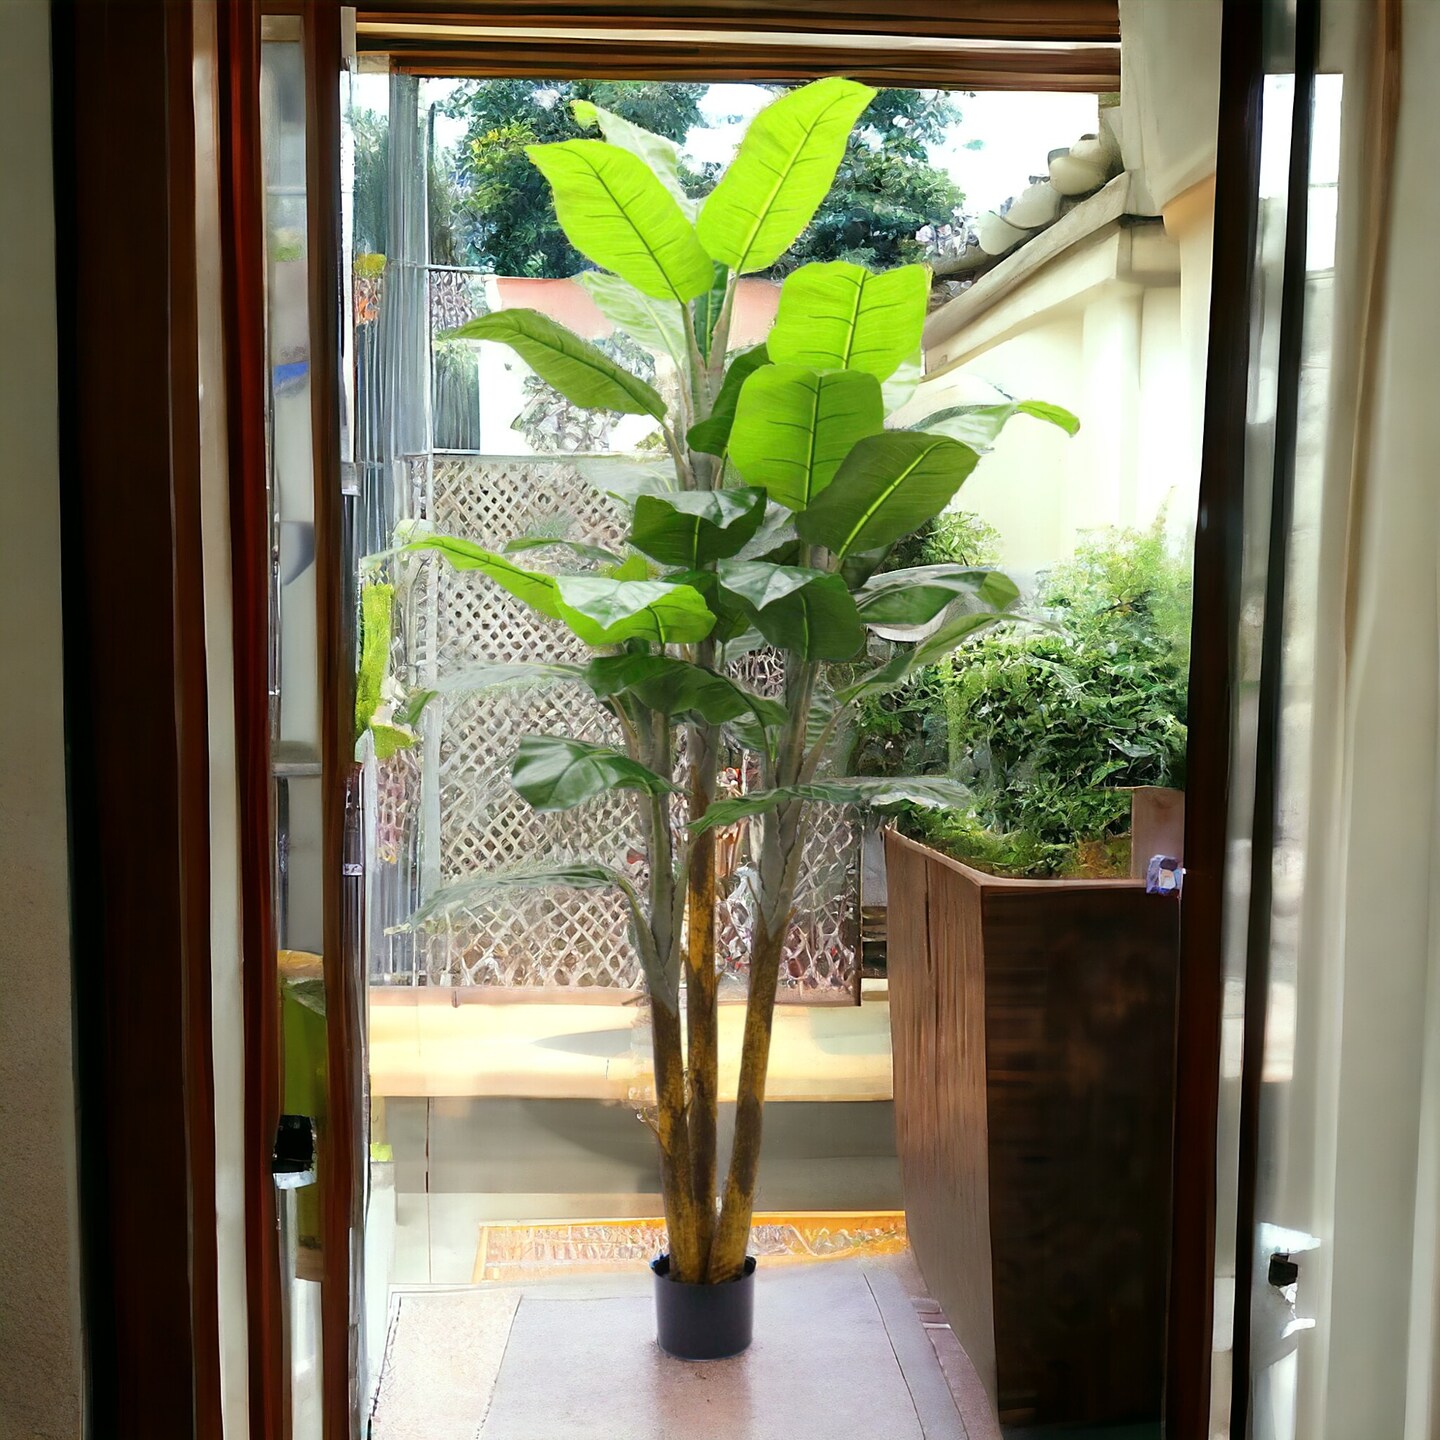 7ft Banana Tree in Black Pot with 36 Silk Leaves by Floral Home&#xAE;